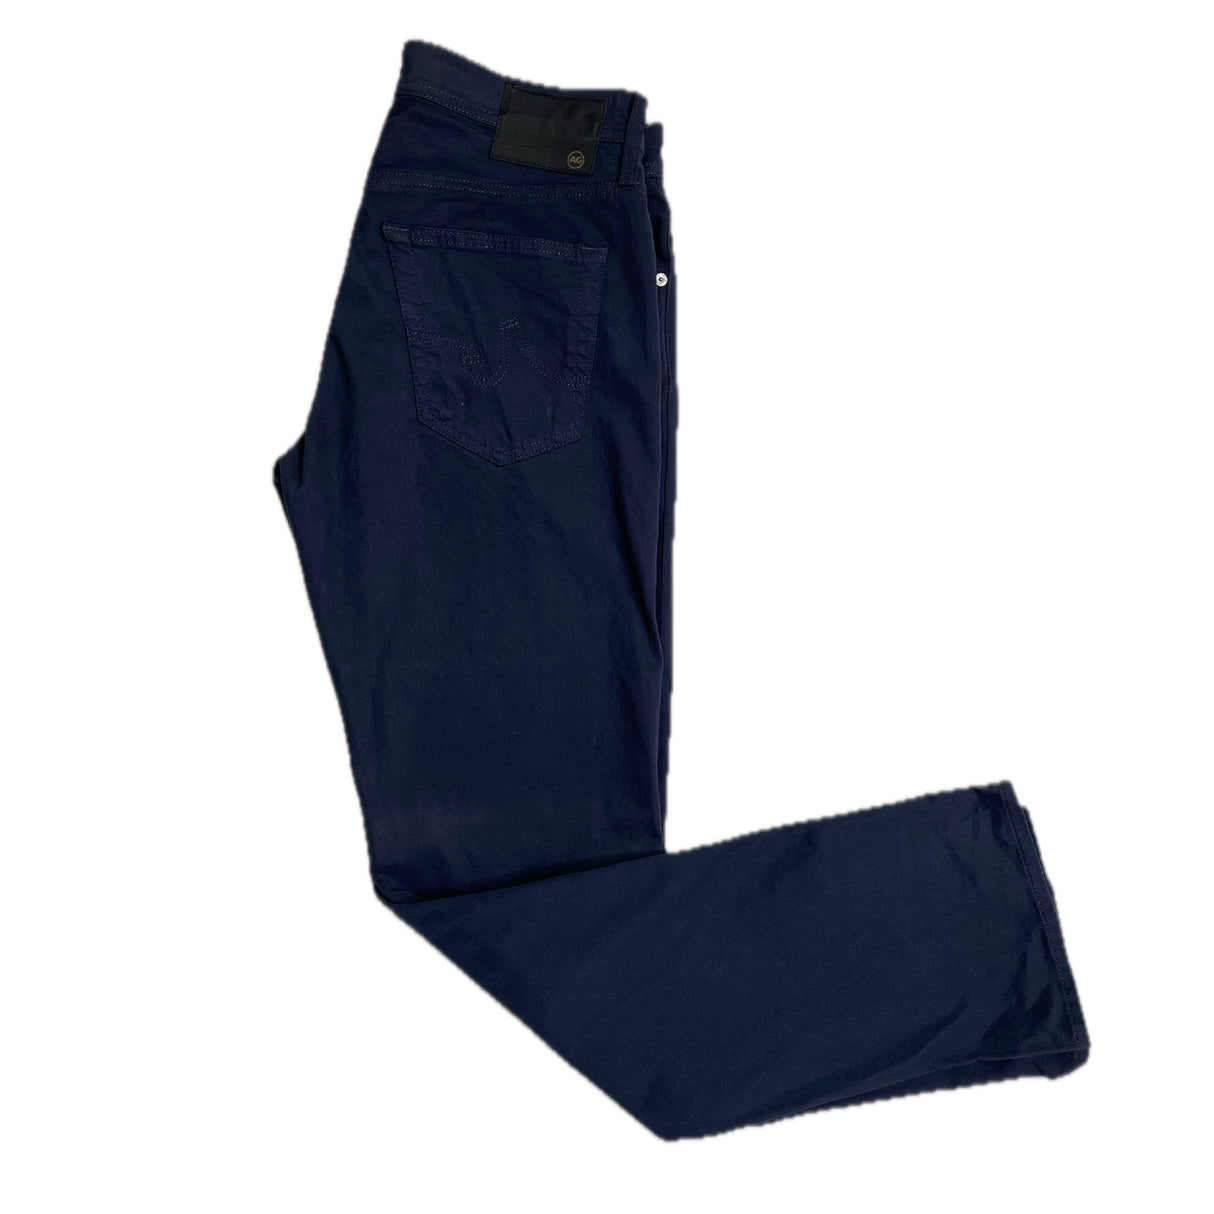 A Second Chance - AG - Tailored Legs 31 32 Dark Blue Men - Delivery All Over Lebanon